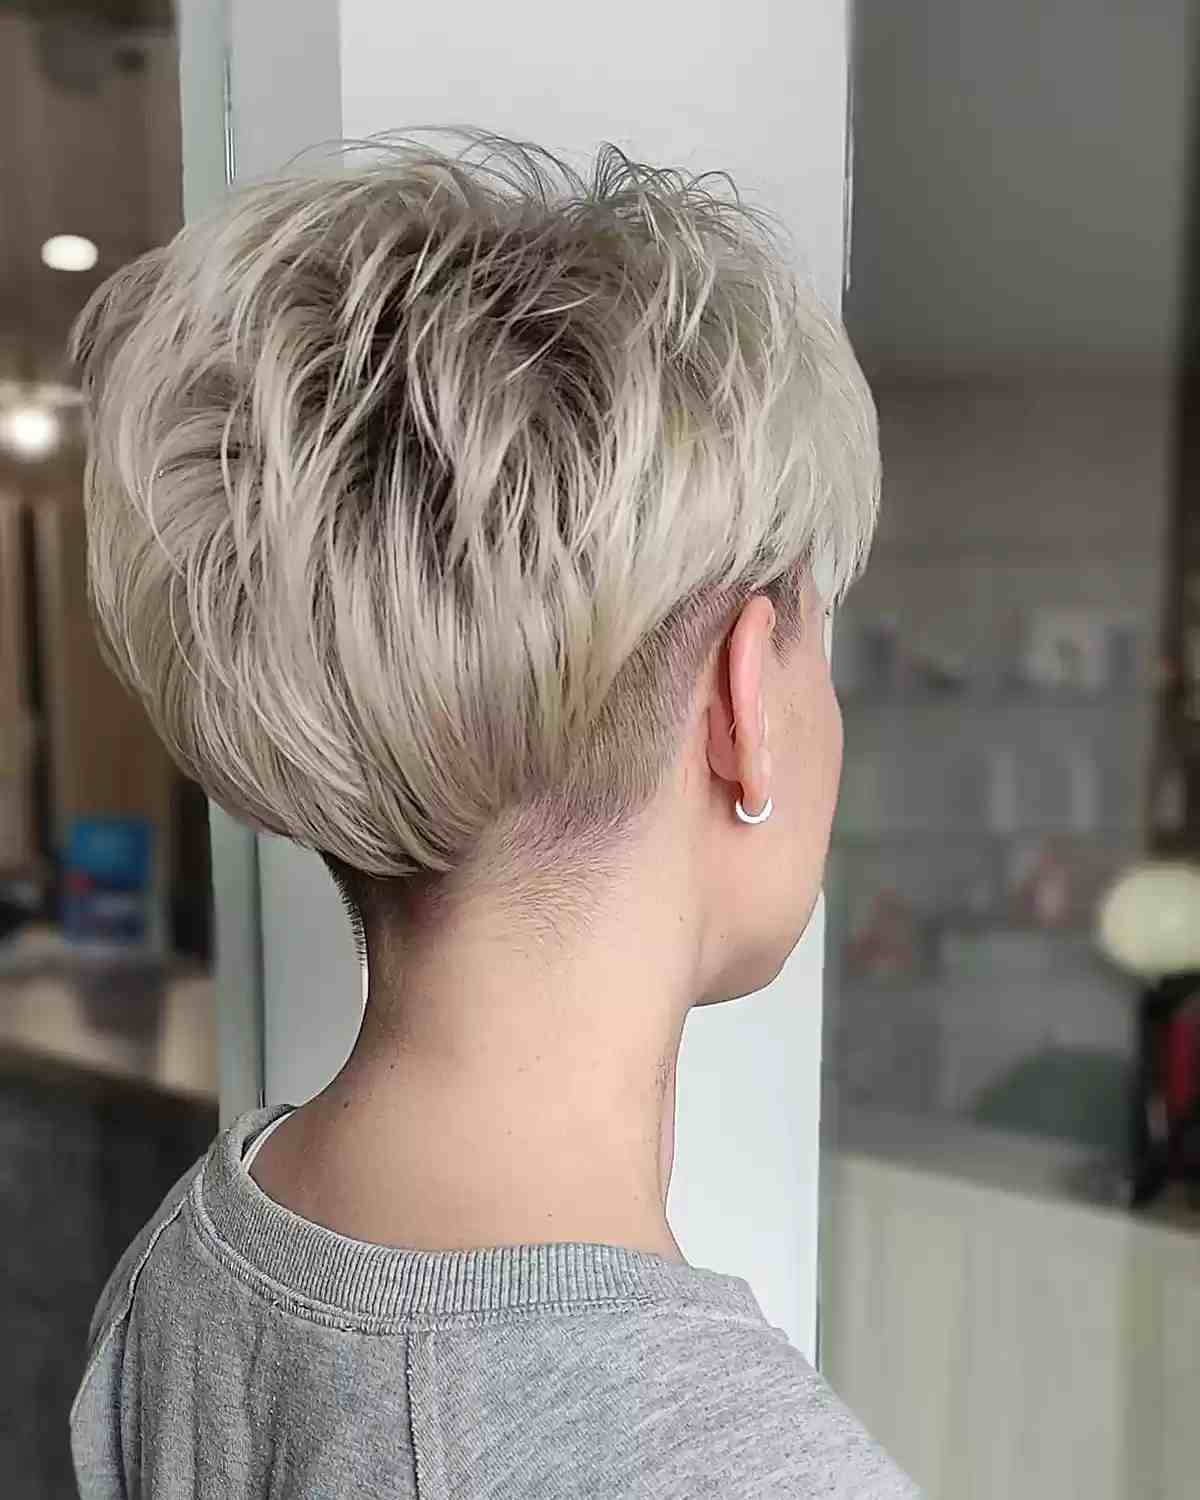 Undercut Pixie Cut with Shaved Nape on women with short blonde hair